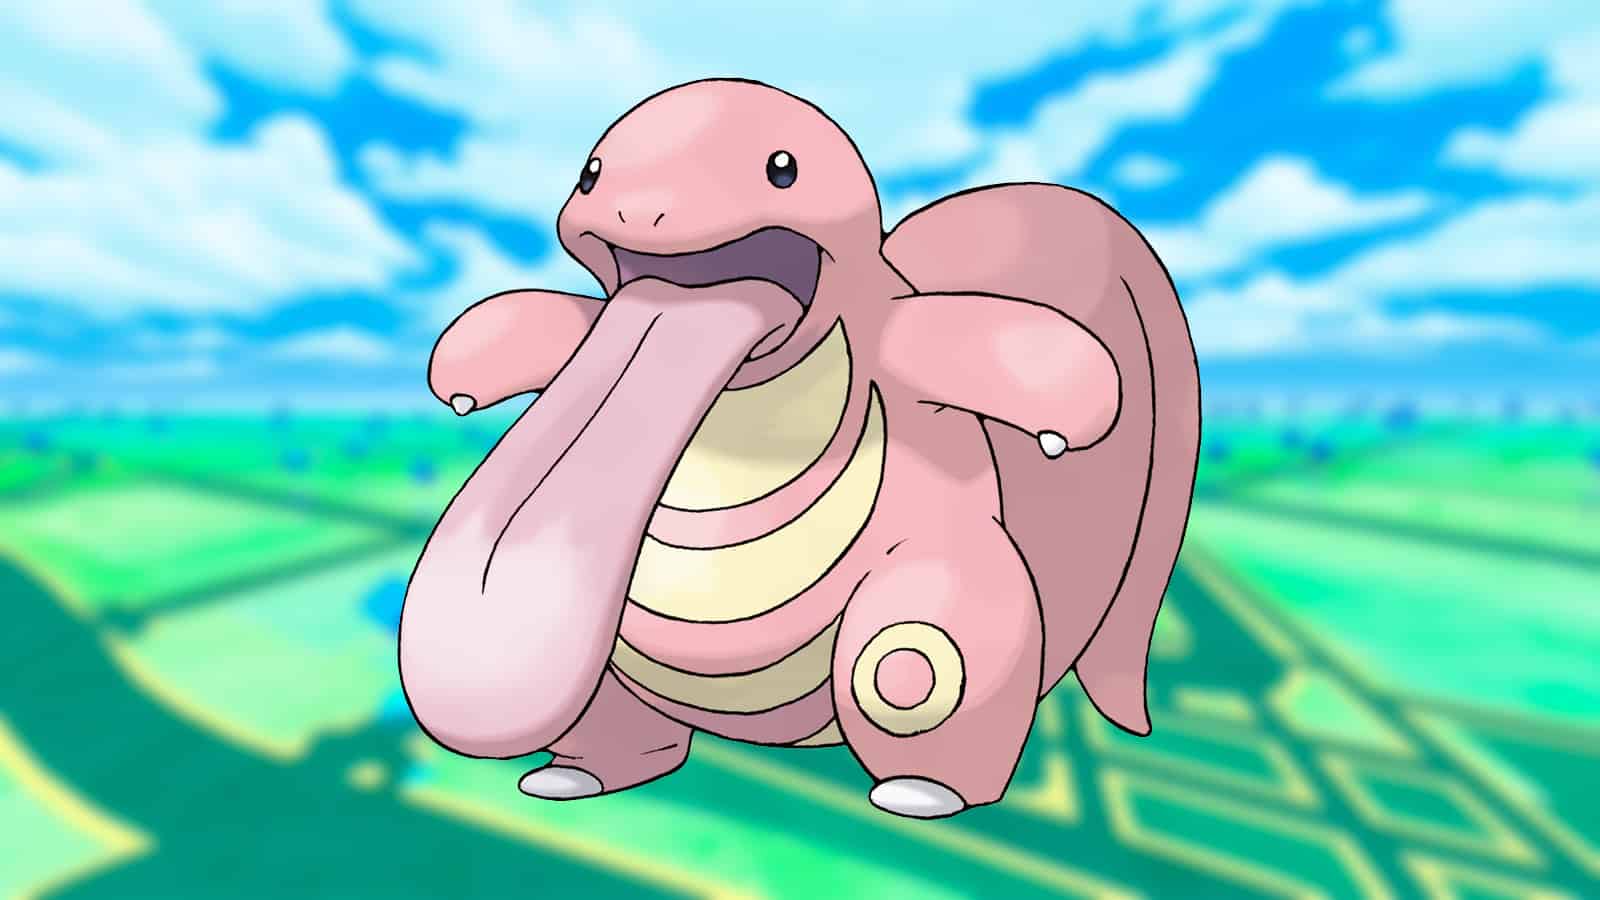 Lickitung in the Pokemon Go Love Cup